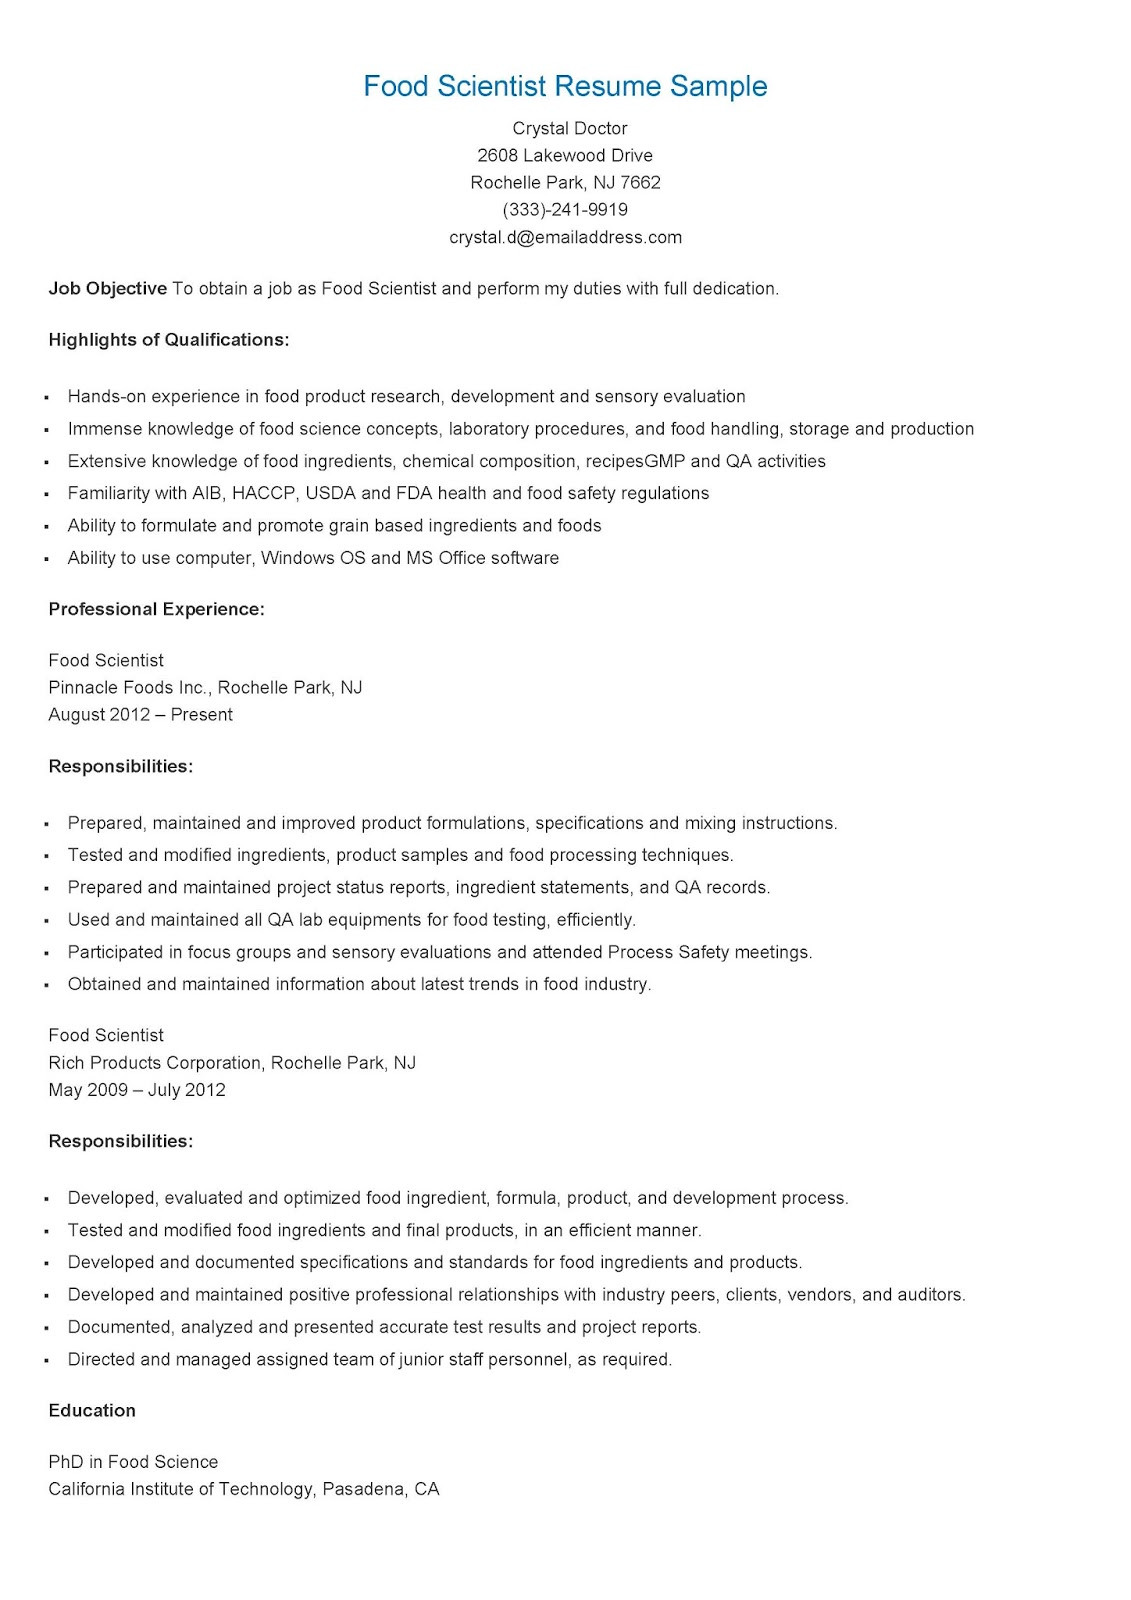 Food Science and Nutrition Resume Sample Resume Samples Food Scientist Resume Sample